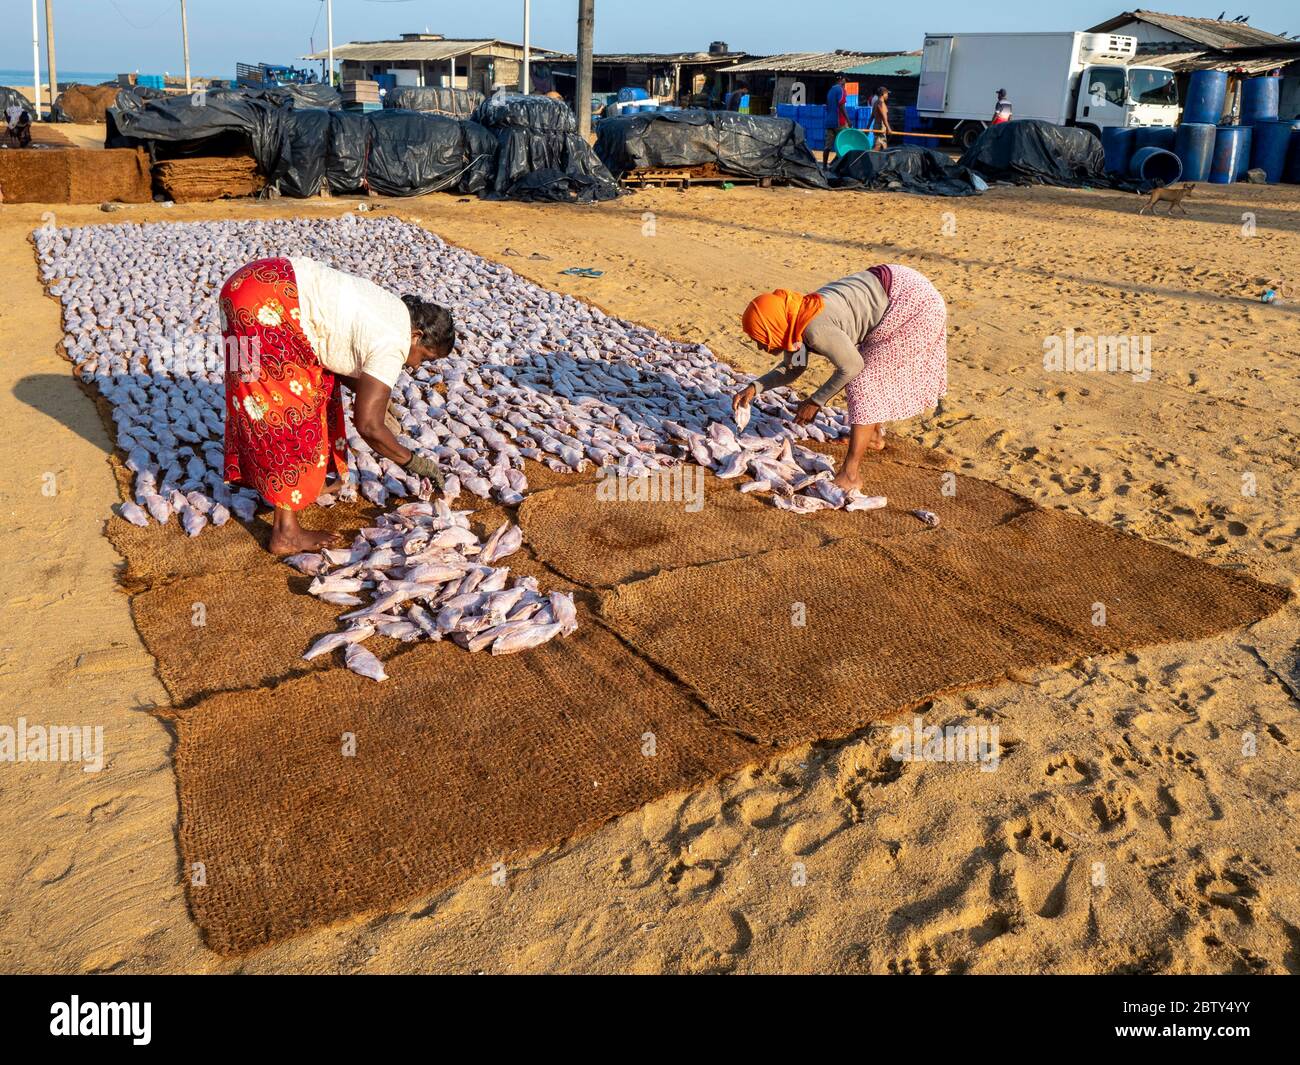 Workers lay out the days catch to dry in the sun at the Negombo fish market, Negombo, Sri Lanka, Asia Stock Photo